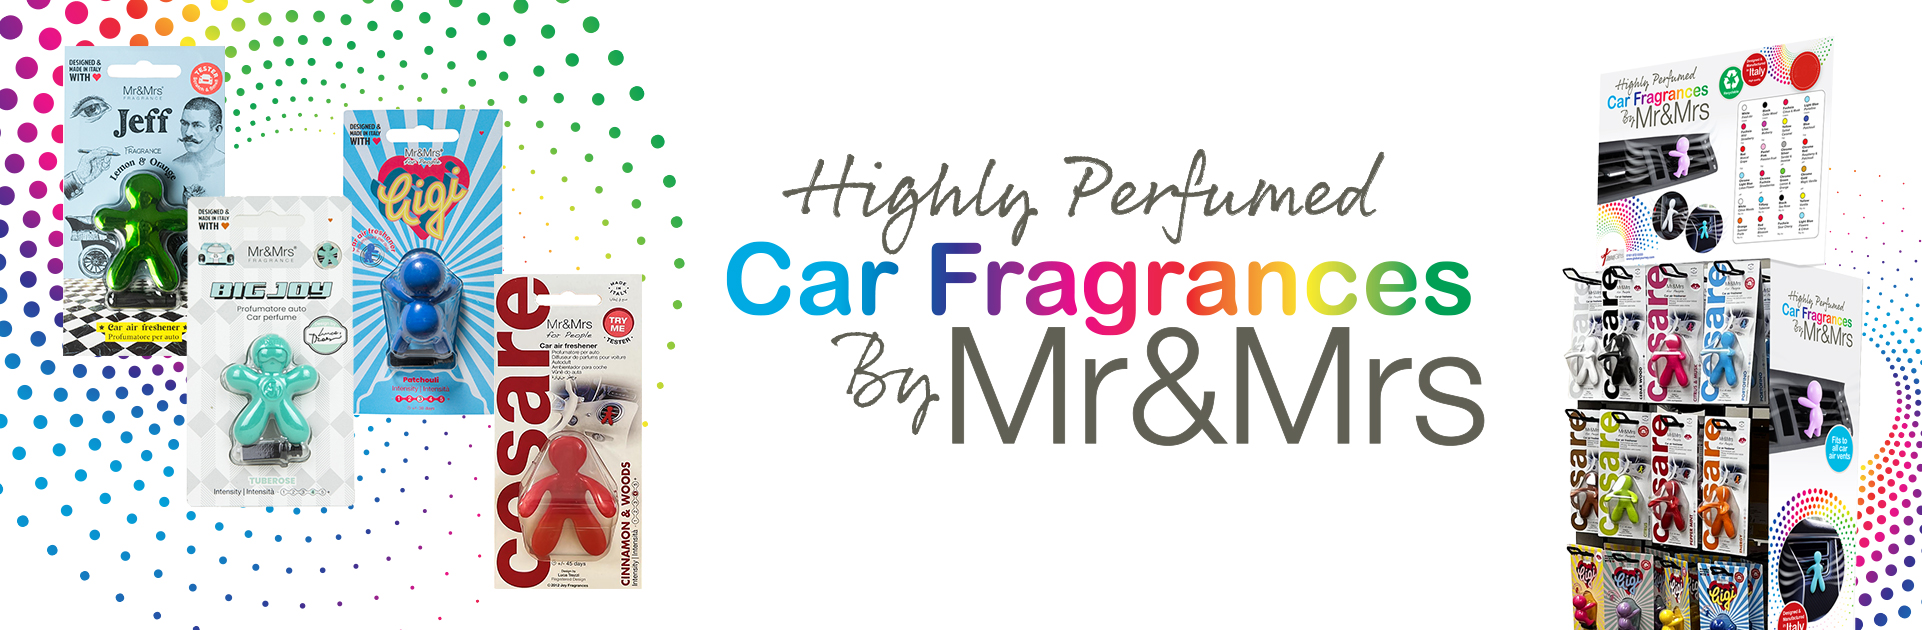 highly perfumed car fragrances by mr and mrs link